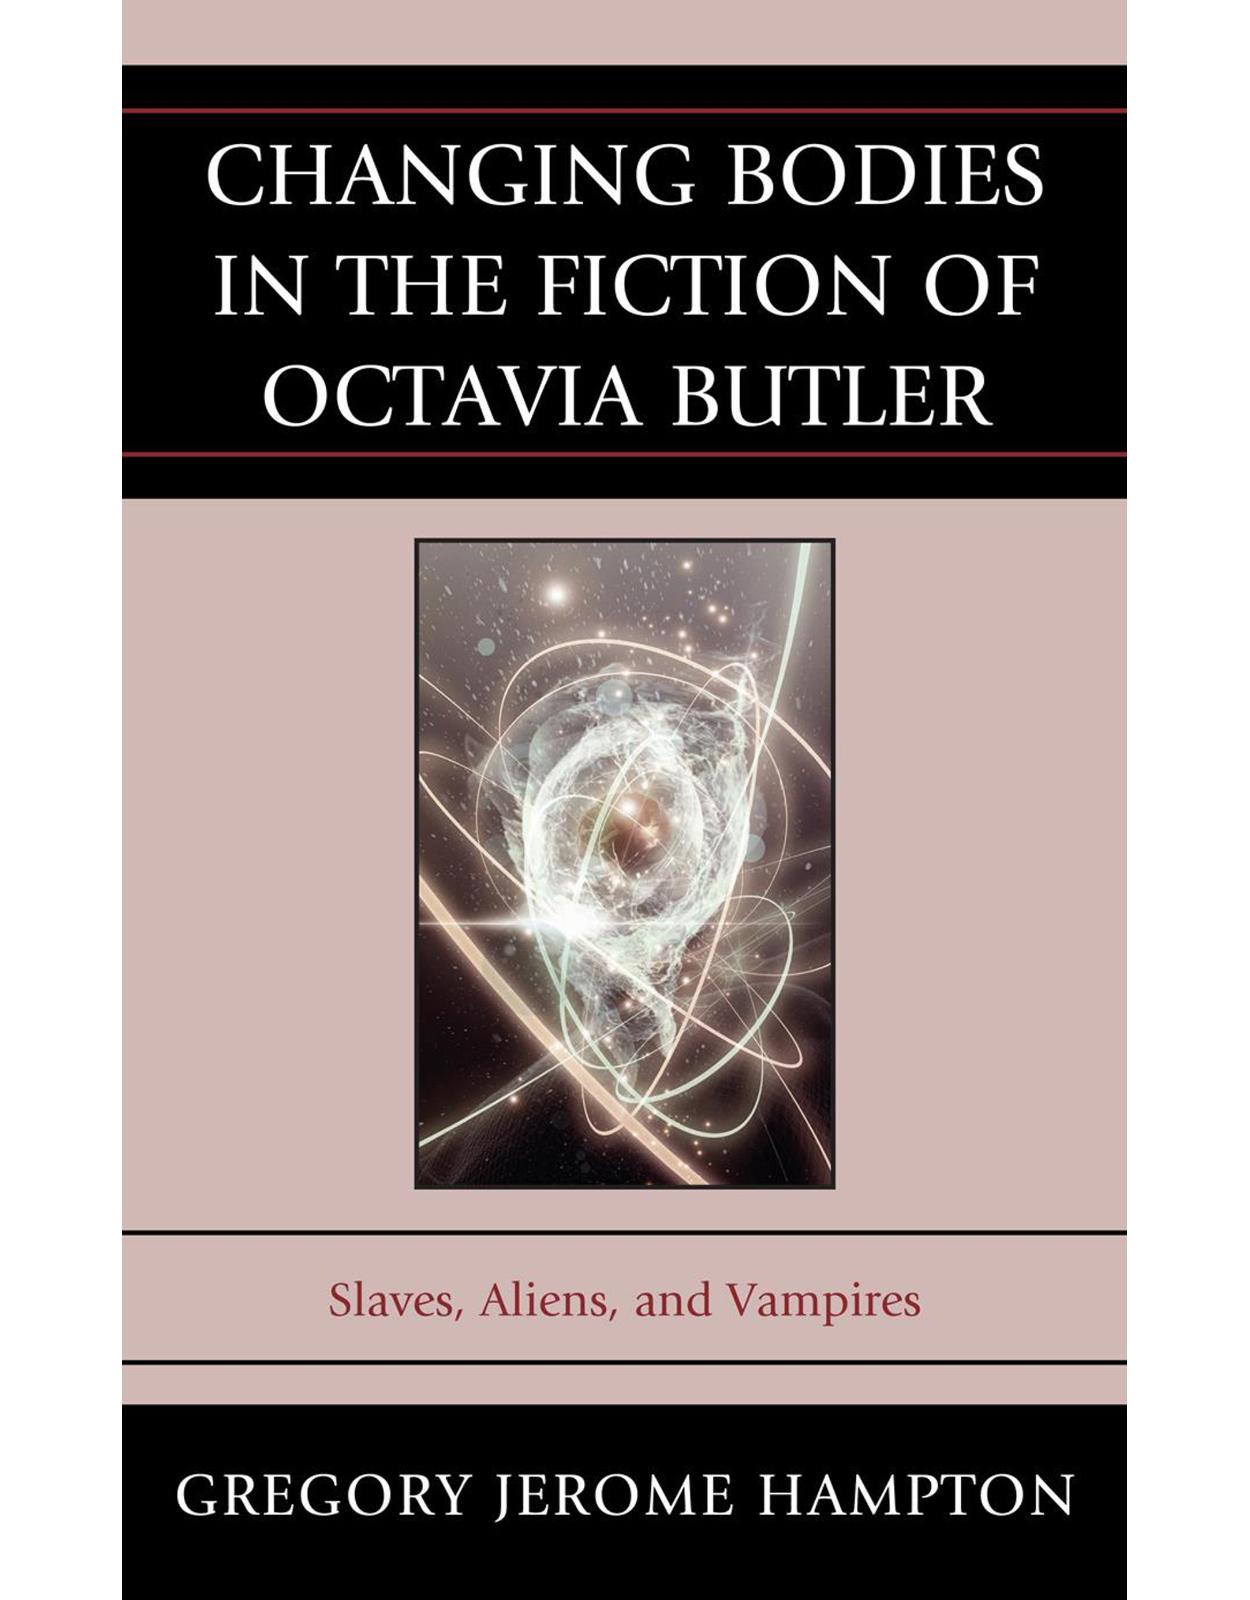 Changing Bodies in the Fiction of Octavia Butler: Slaves, Aliens, and Vampires